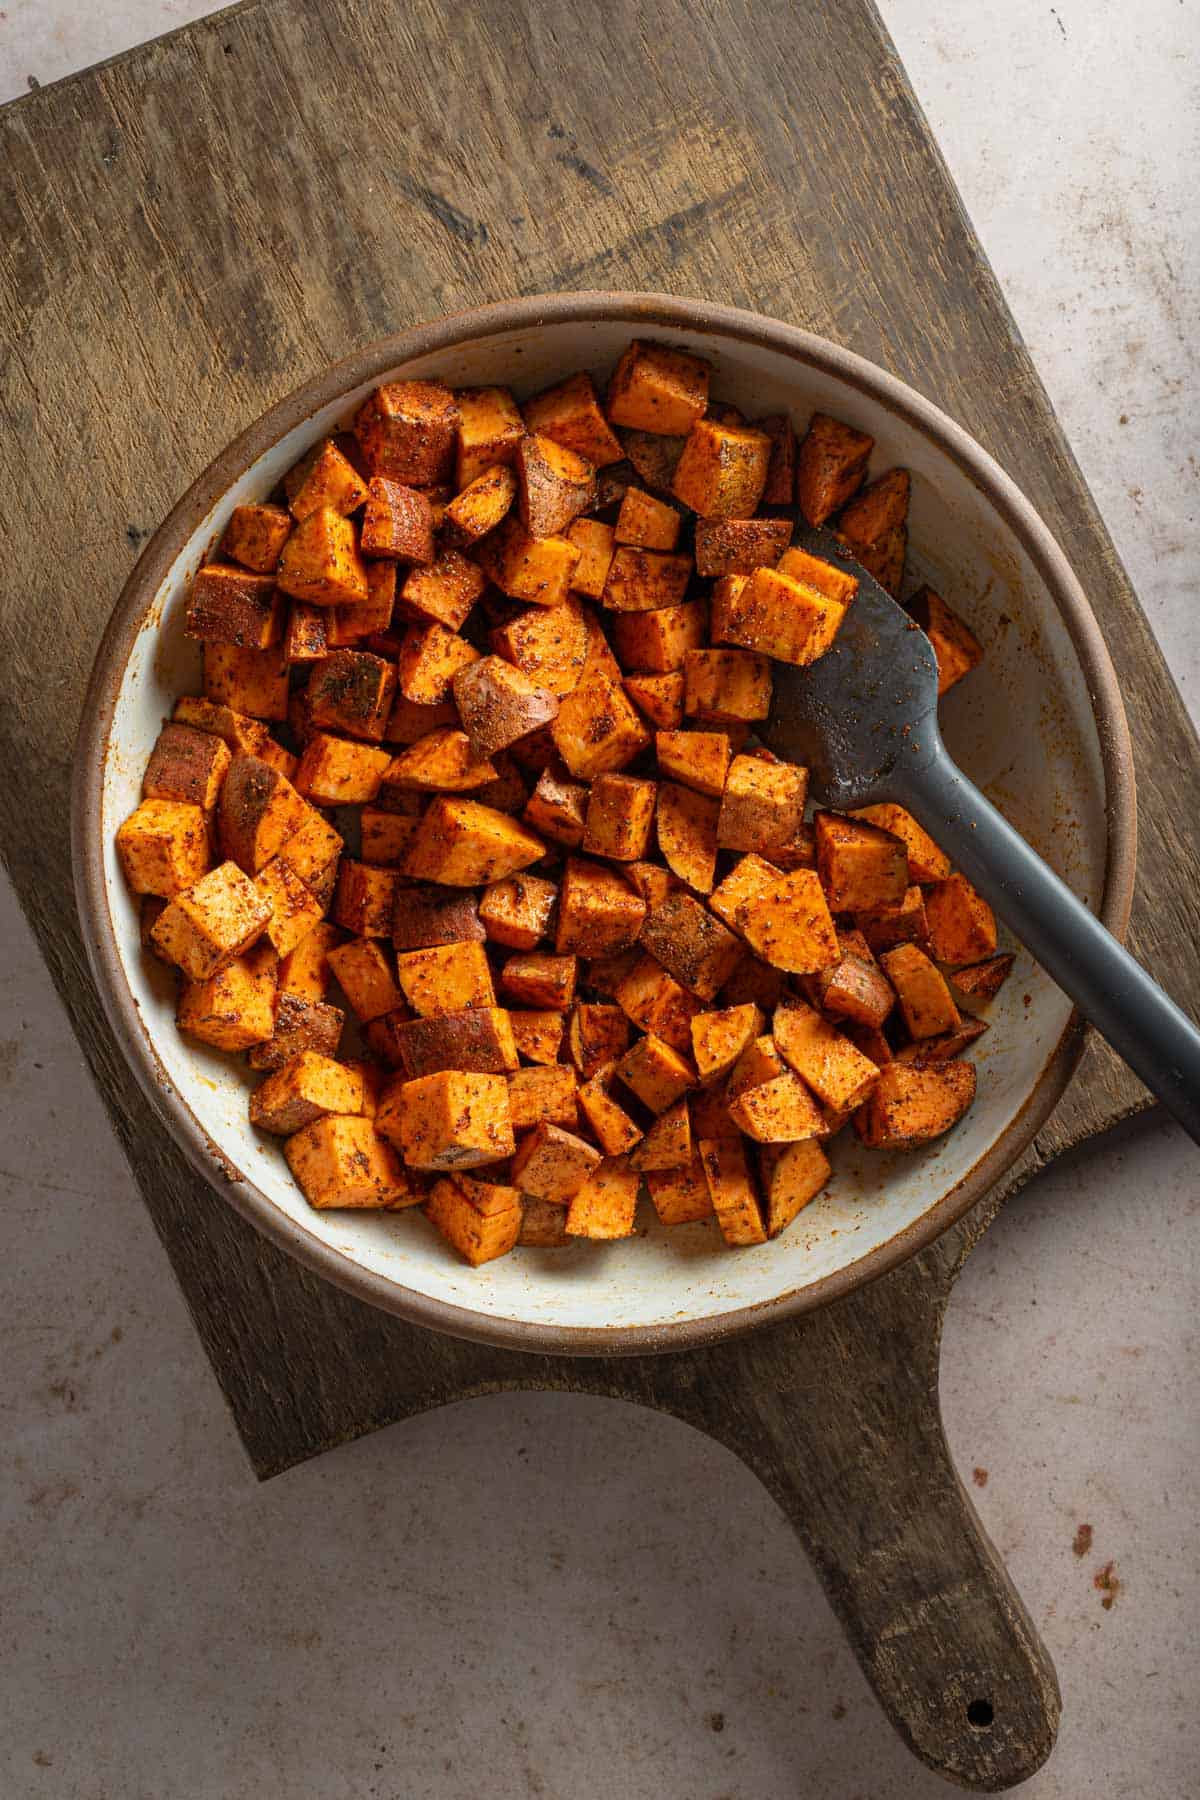 A bowl with sweet potato cubes tossed with seasonings.